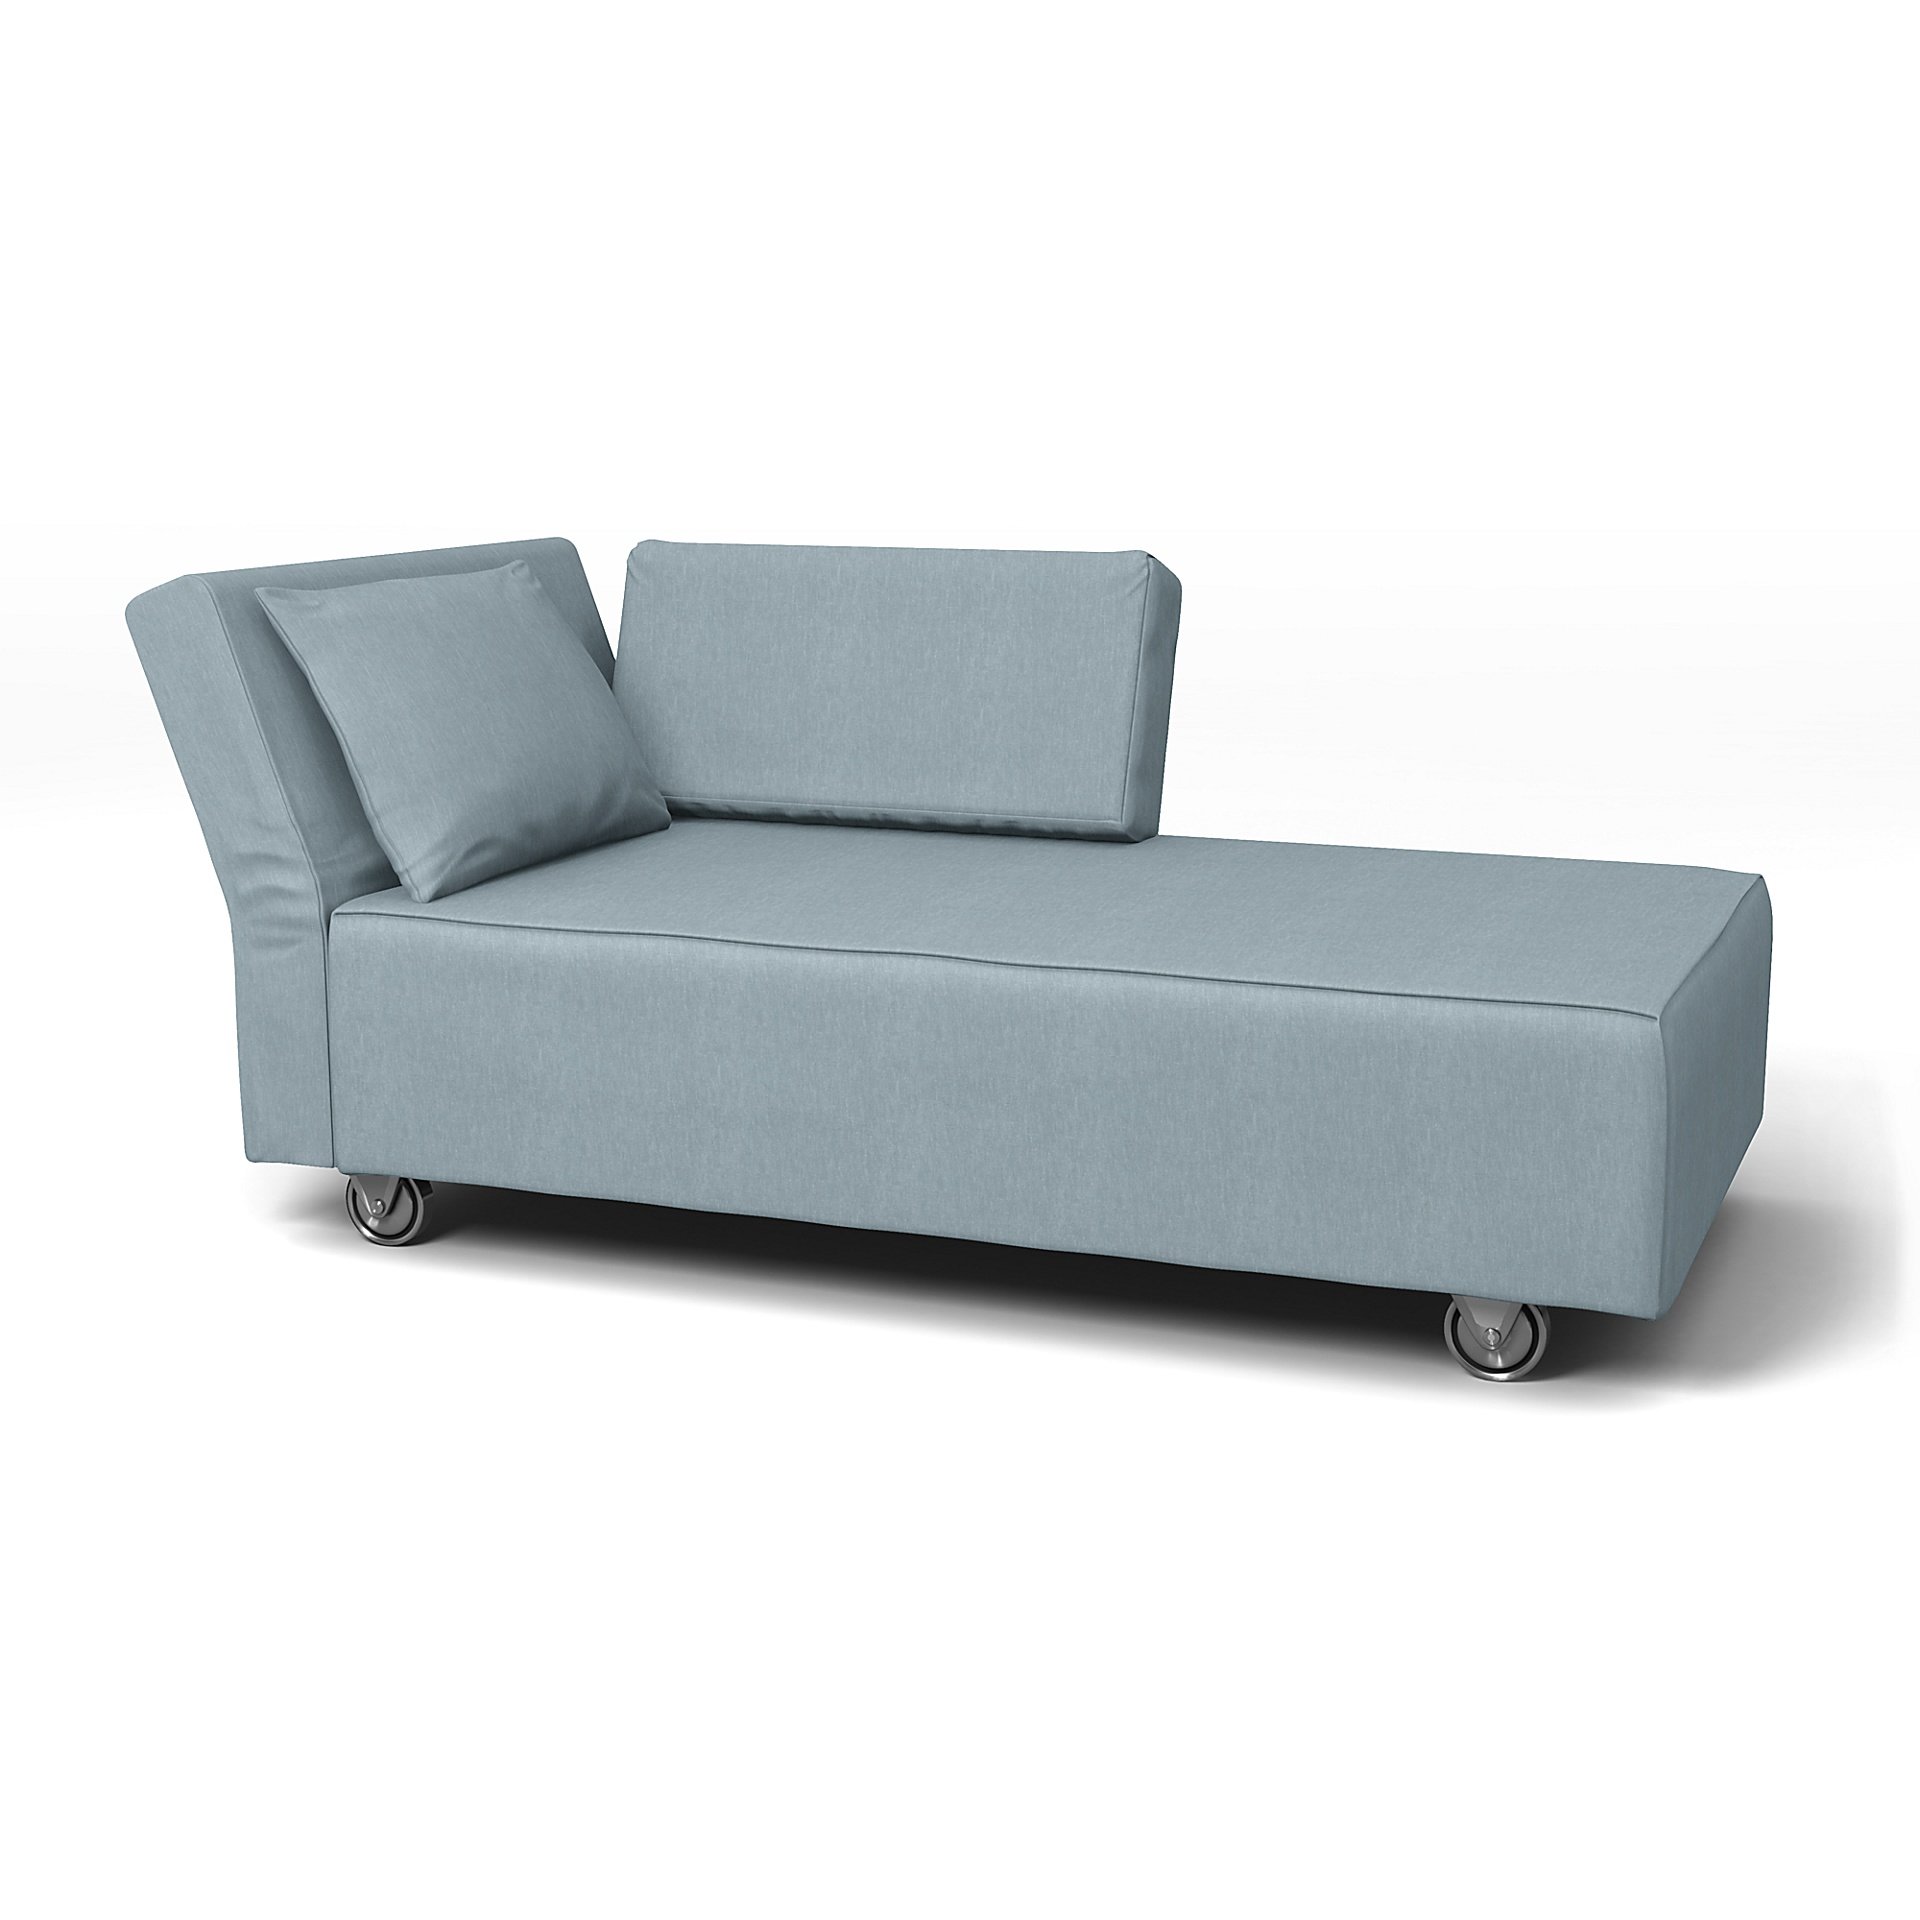 IKEA - Falsterbo Chaise with Left Armrest Cover, Dusty Blue, Linen - Bemz